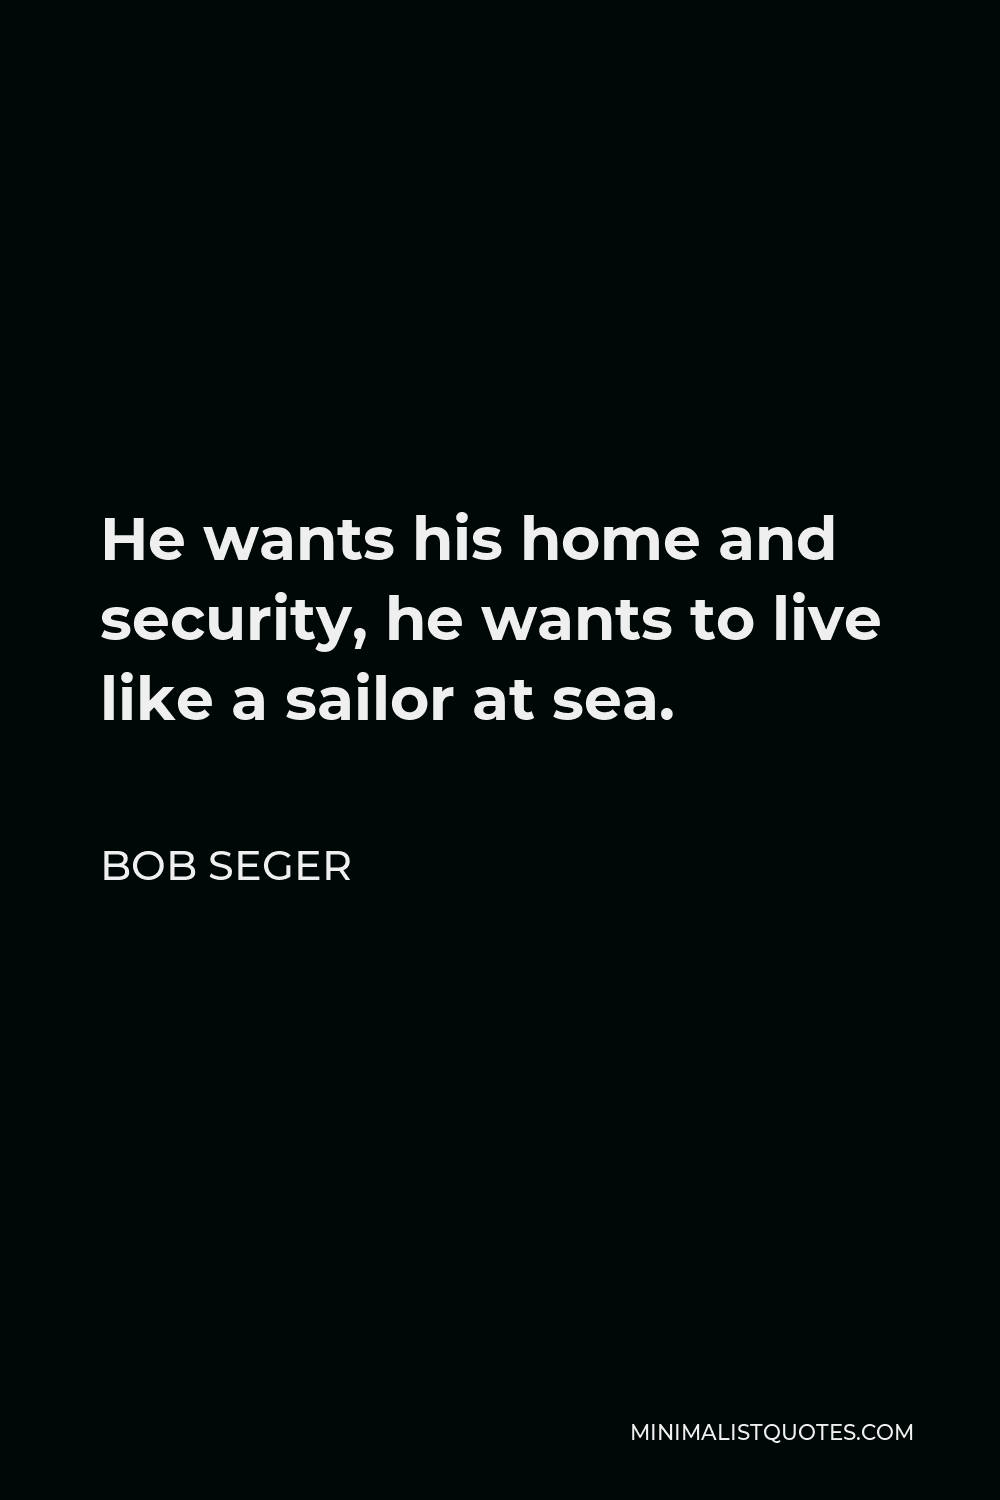 Bob Seger Quote - He wants his home and security, he wants to live like a sailor at sea.